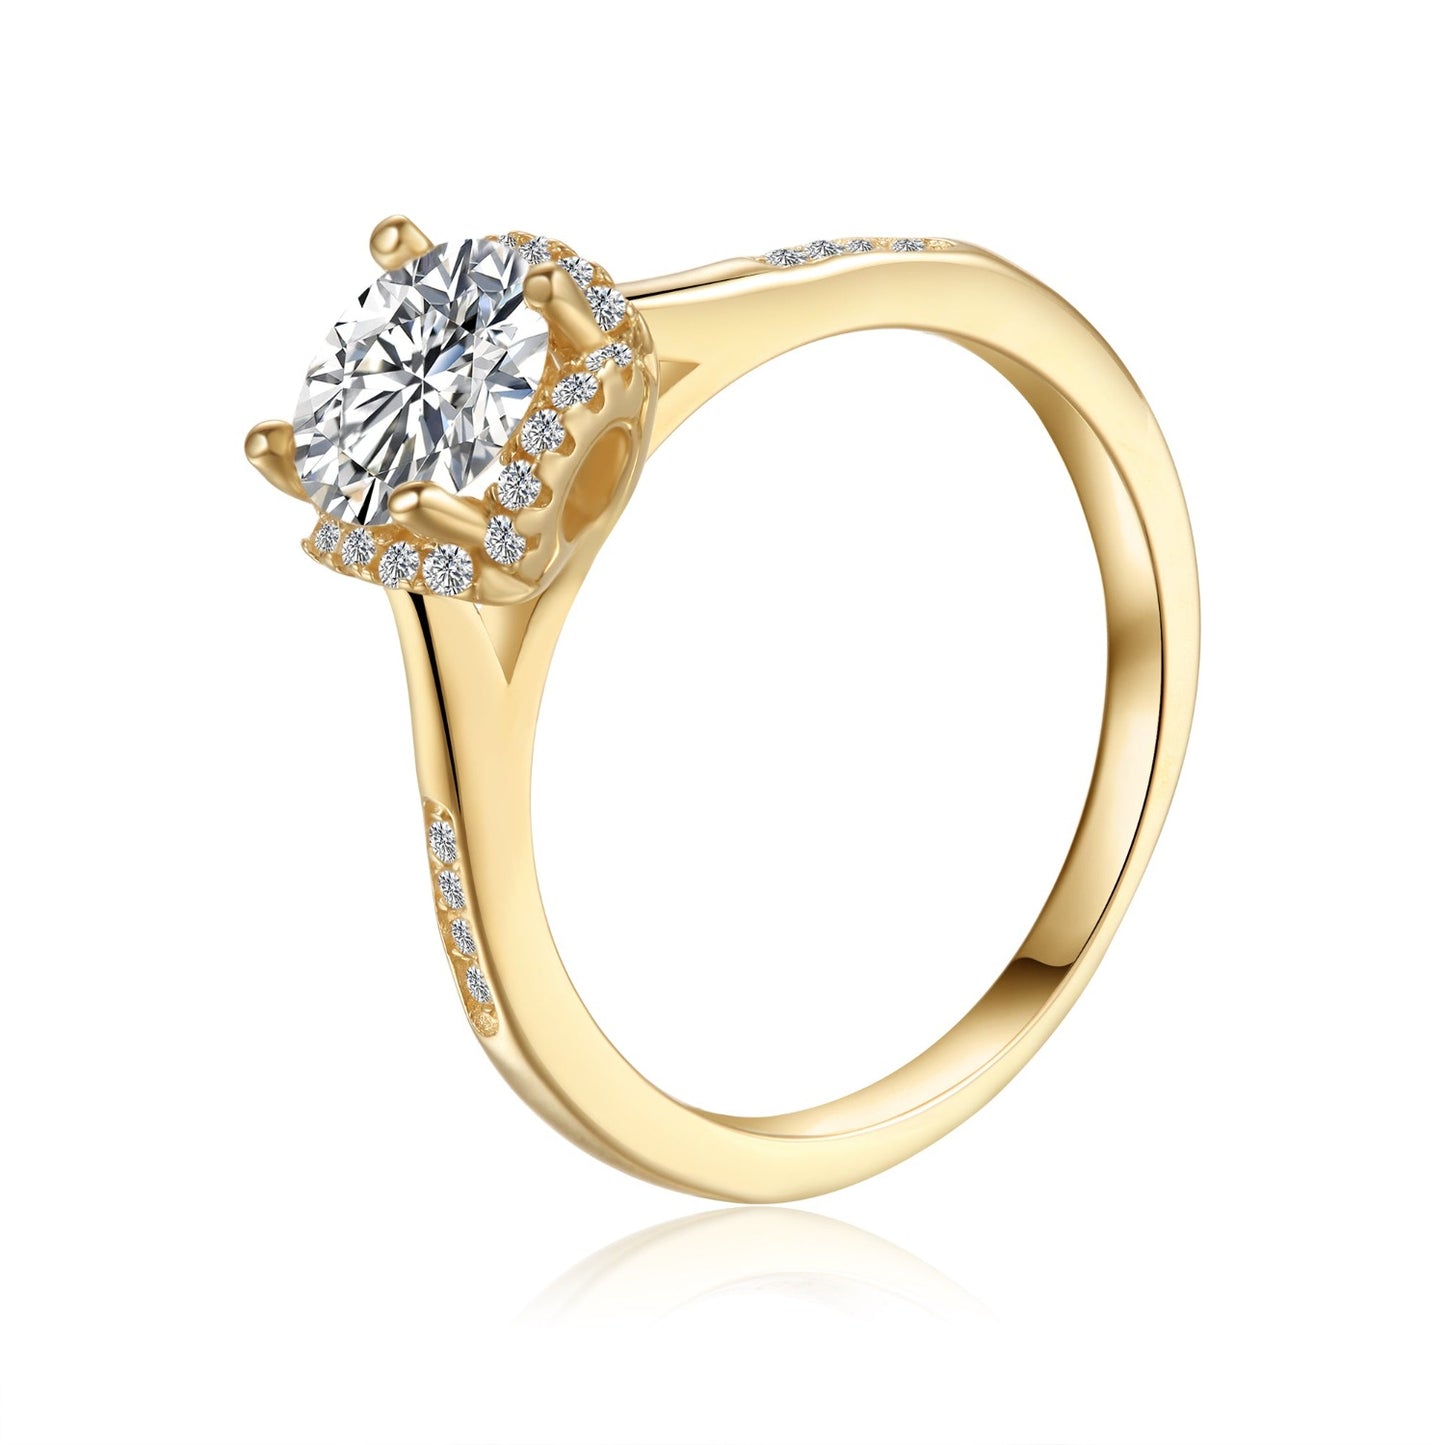 Modern Halo 1.00ct Moissanite Engagement Ring Set in 9ct Yellow Gold